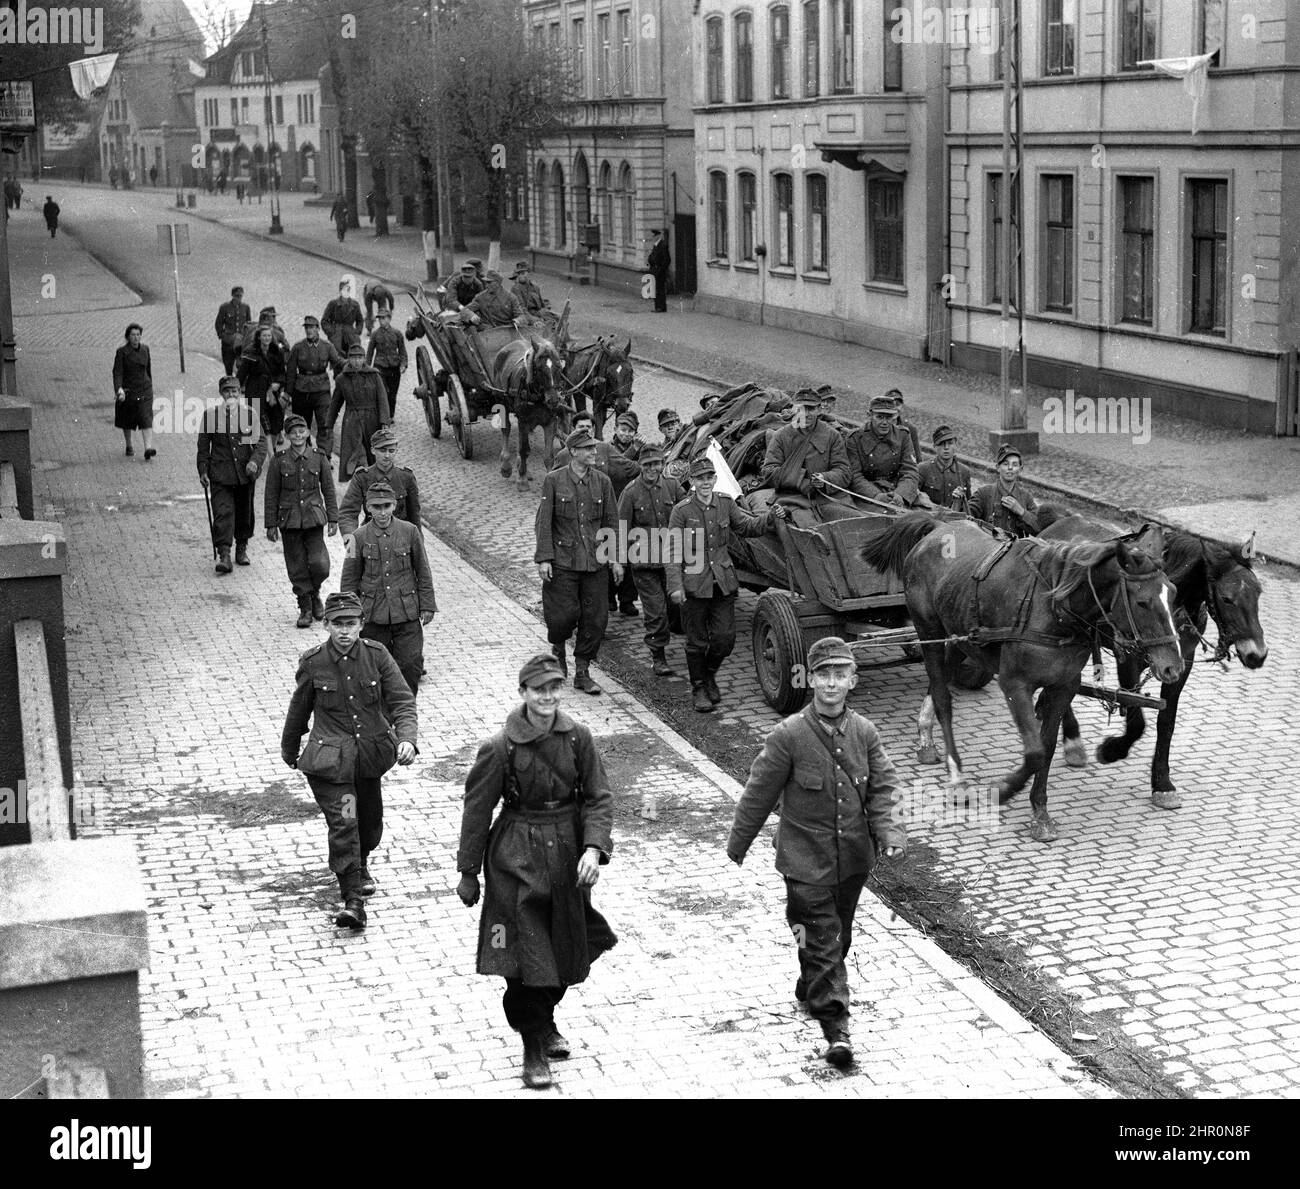 Germany World War Two 1945. German army soldiers most of them very young smiling as they return home defeated with a white surrender flag on their horse and cart. White flags can also be seen draped from some of the buidlings. Stock Photo